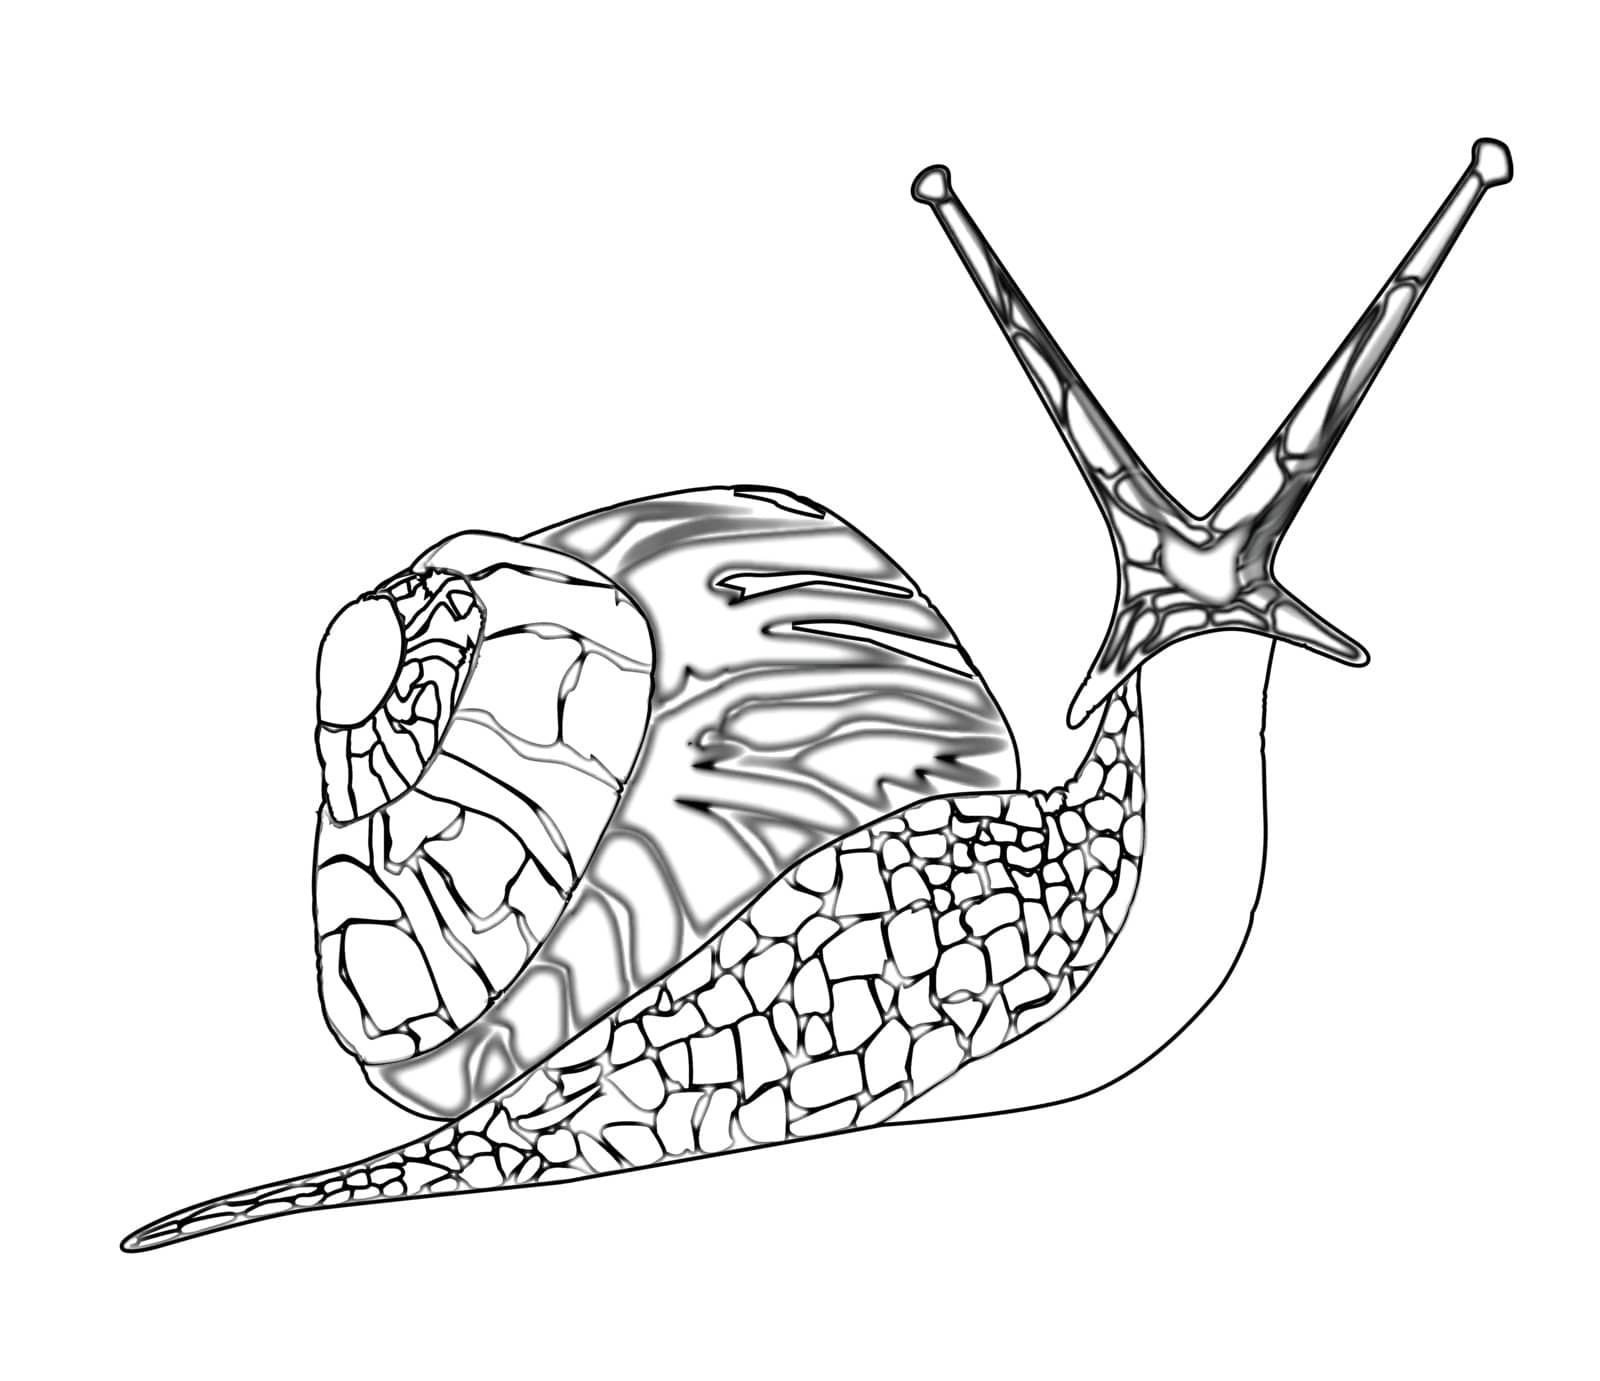 A snail isolated on a white background